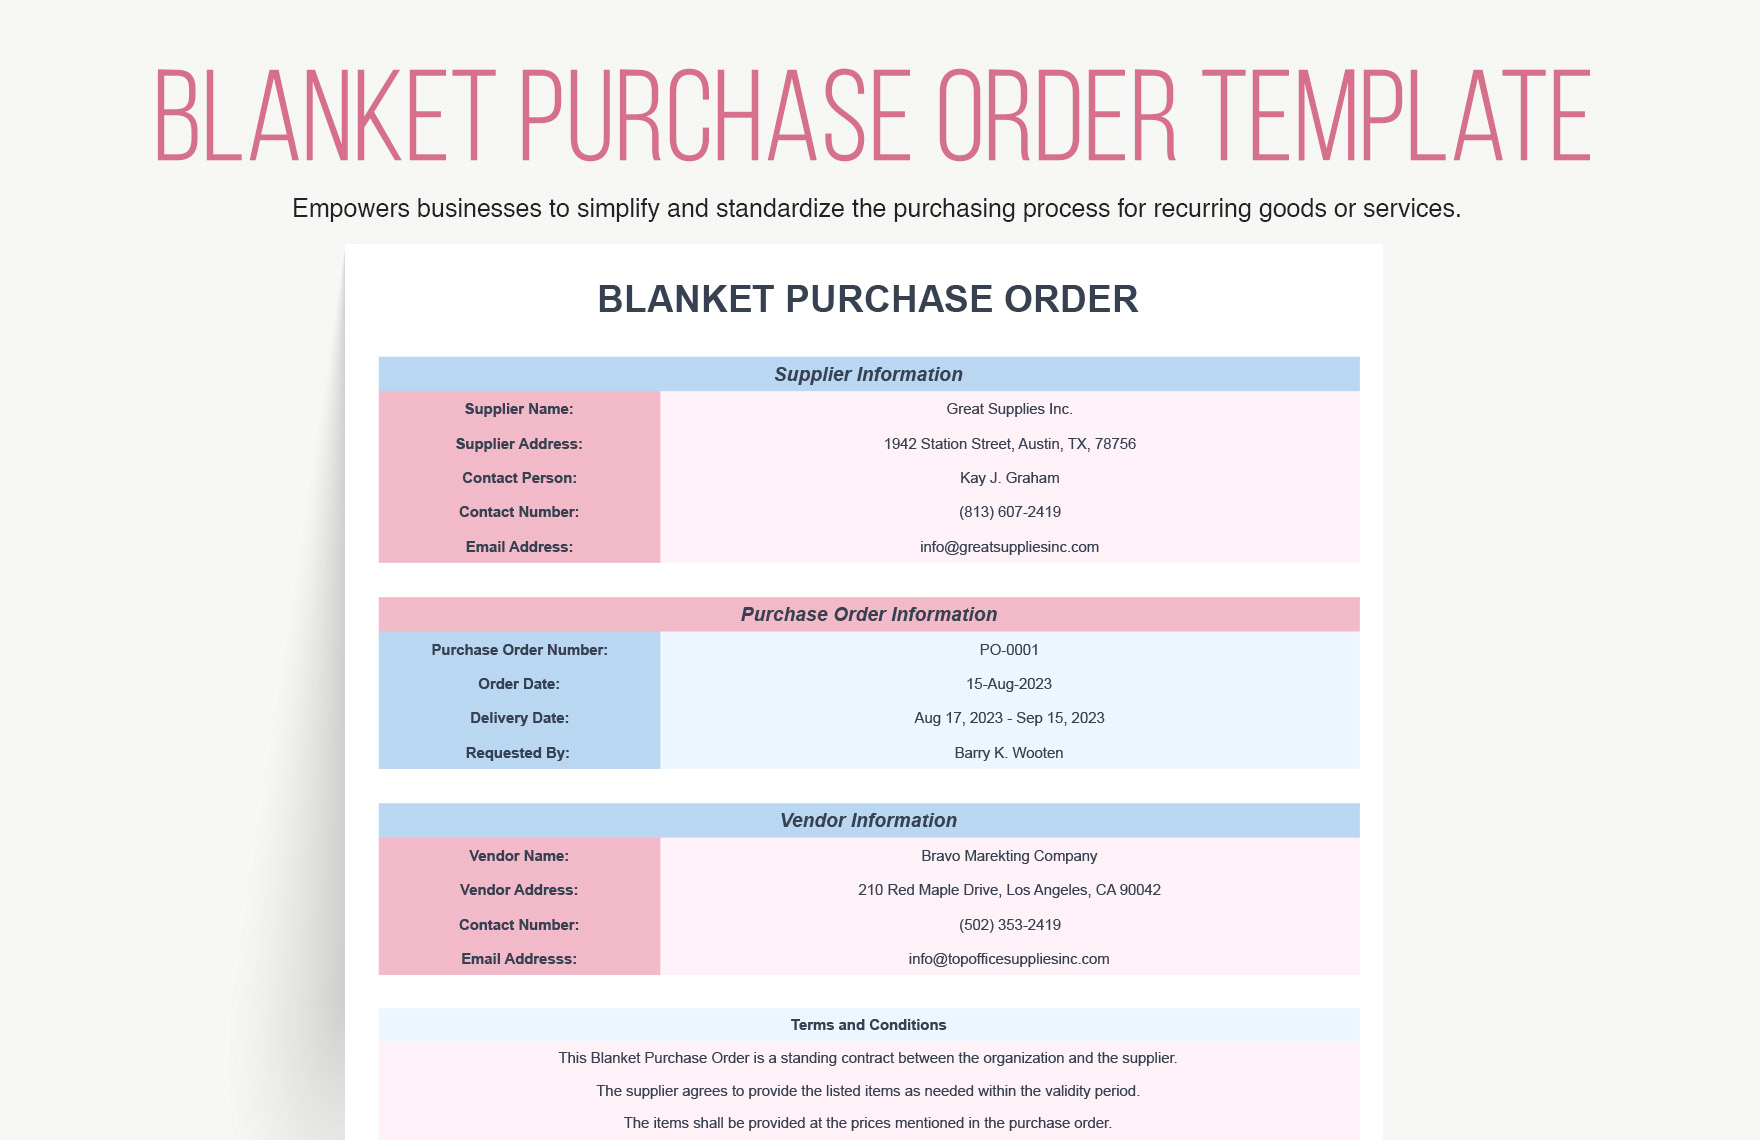 Blanket Purchase Order Template - Download in Excel, Google Sheets ...